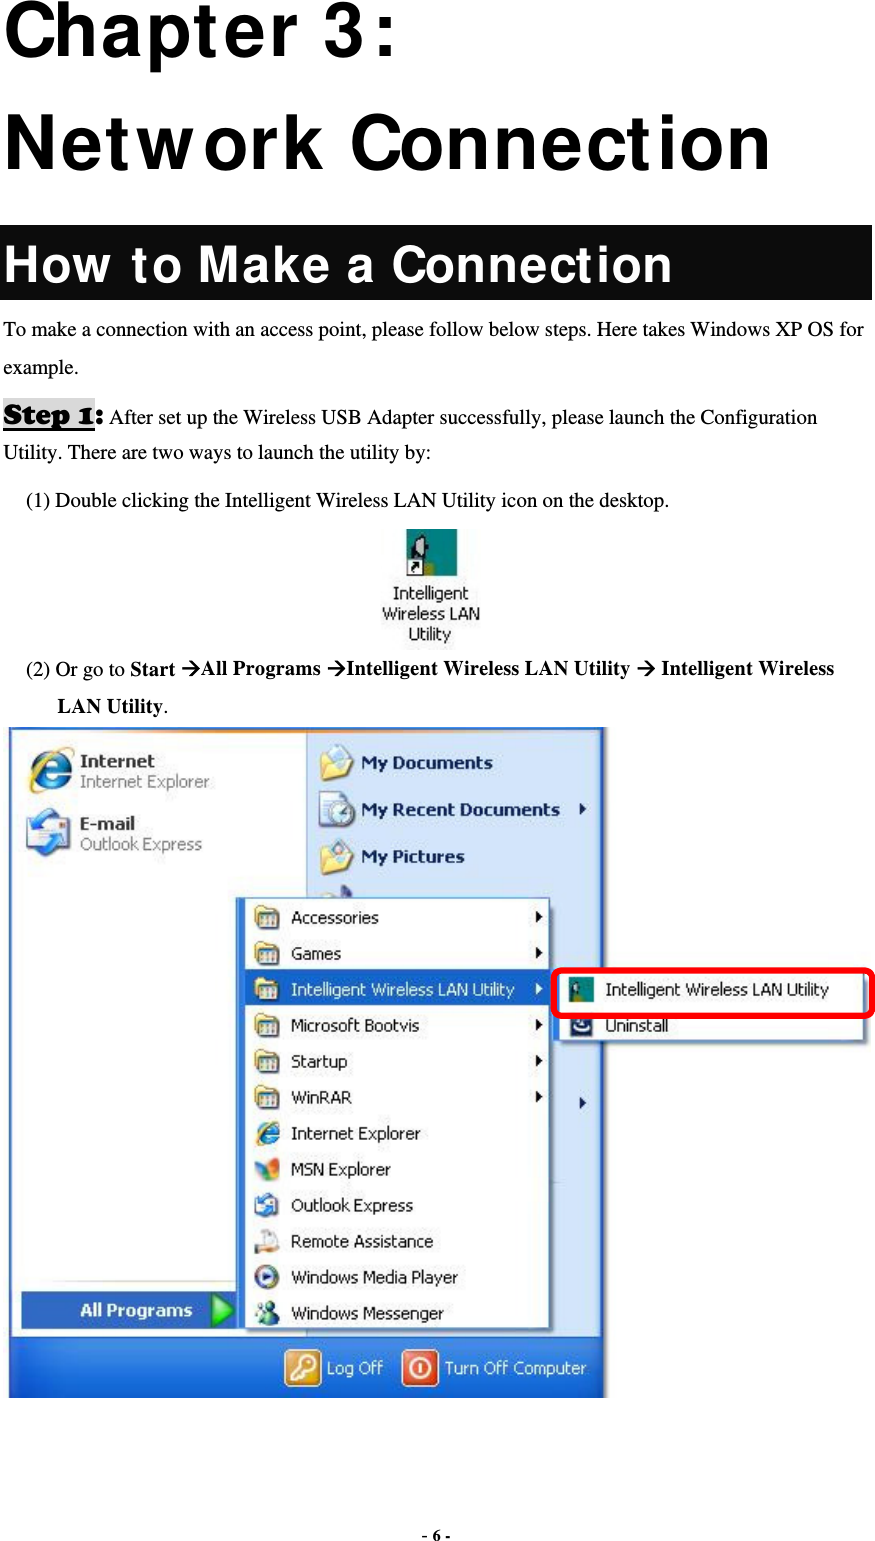  - 6 - Chapter 3: Network Connection How to Make a Connection To make a connection with an access point, please follow below steps. Here takes Windows XP OS for example. Step 1: After set up the Wireless USB Adapter successfully, please launch the Configuration Utility. There are two ways to launch the utility by:   (1) Double clicking the Intelligent Wireless LAN Utility icon on the desktop.  (2) Or go to Start All Programs Intelligent Wireless LAN Utility  Intelligent Wireless LAN Utility.  